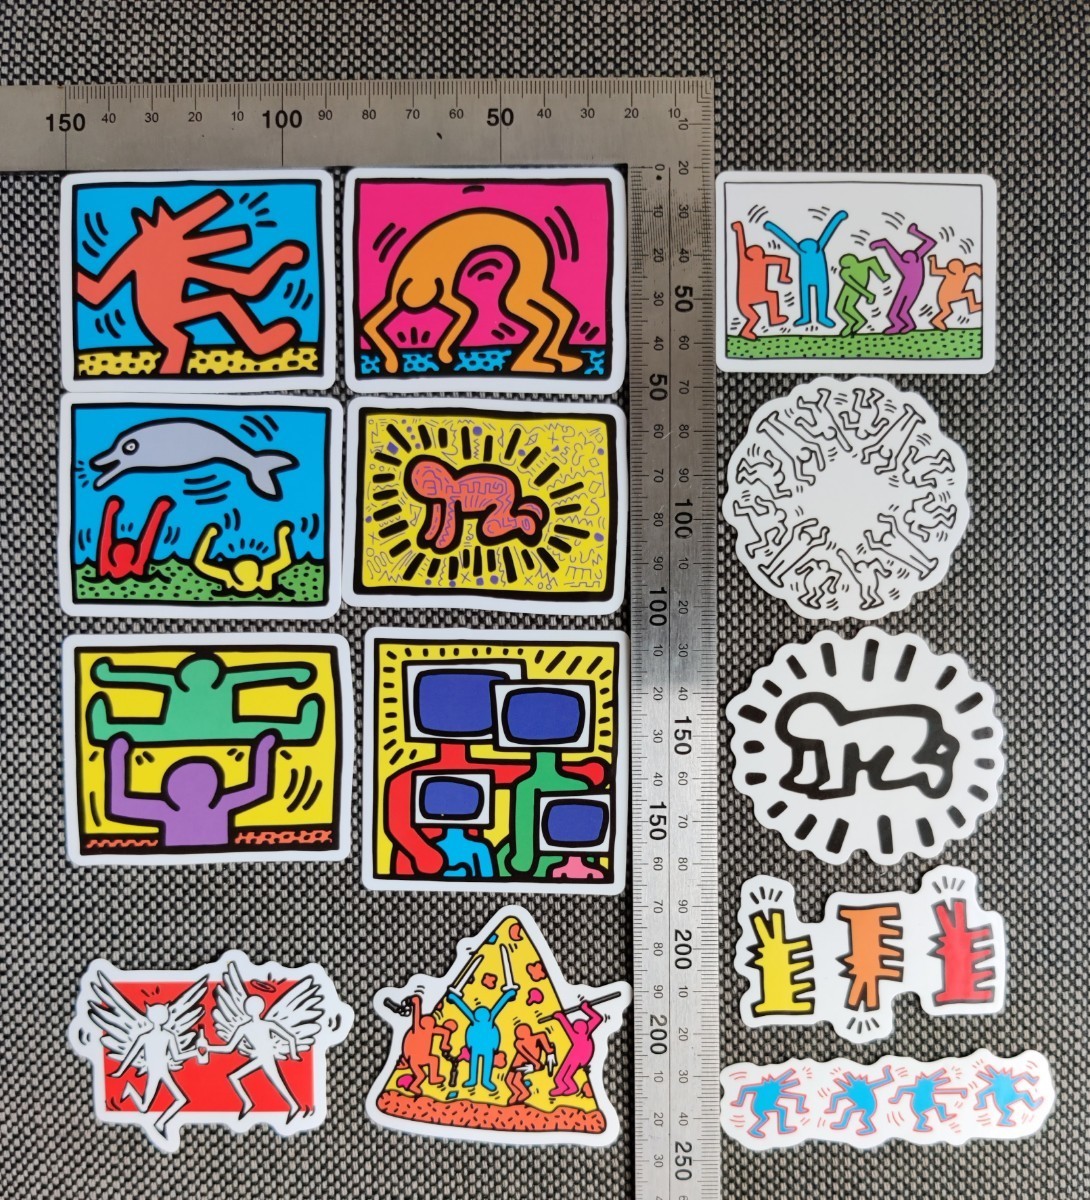 Keith Haring“Art”ステッカー集-A#キース・ヘリング#Keith Haring“Art”Sticker's■Artステッカー集×51枚セット：Special Price！899円_画像6